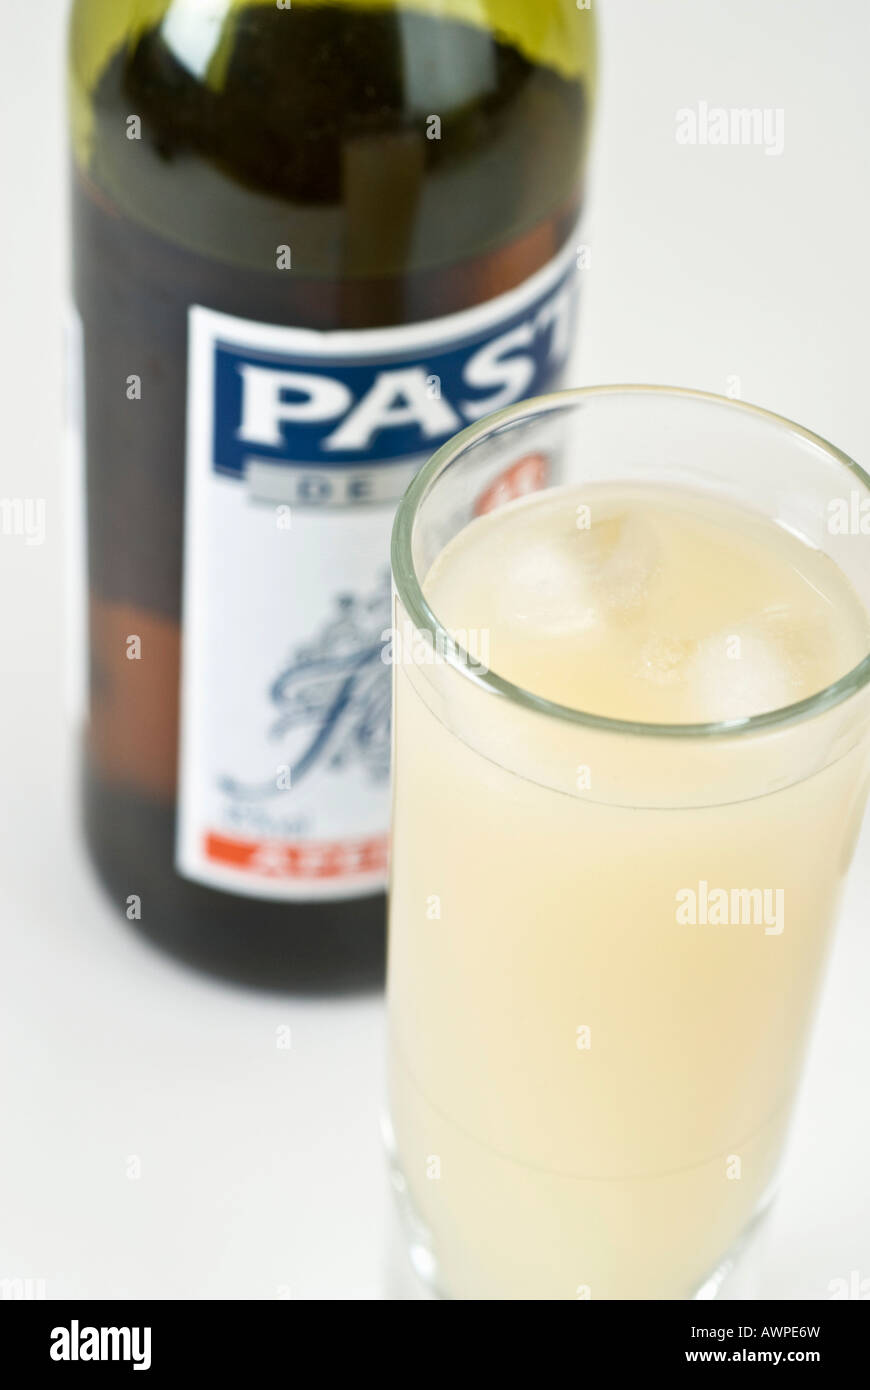 Pastis mixed with water and ice cubes Stock Photo